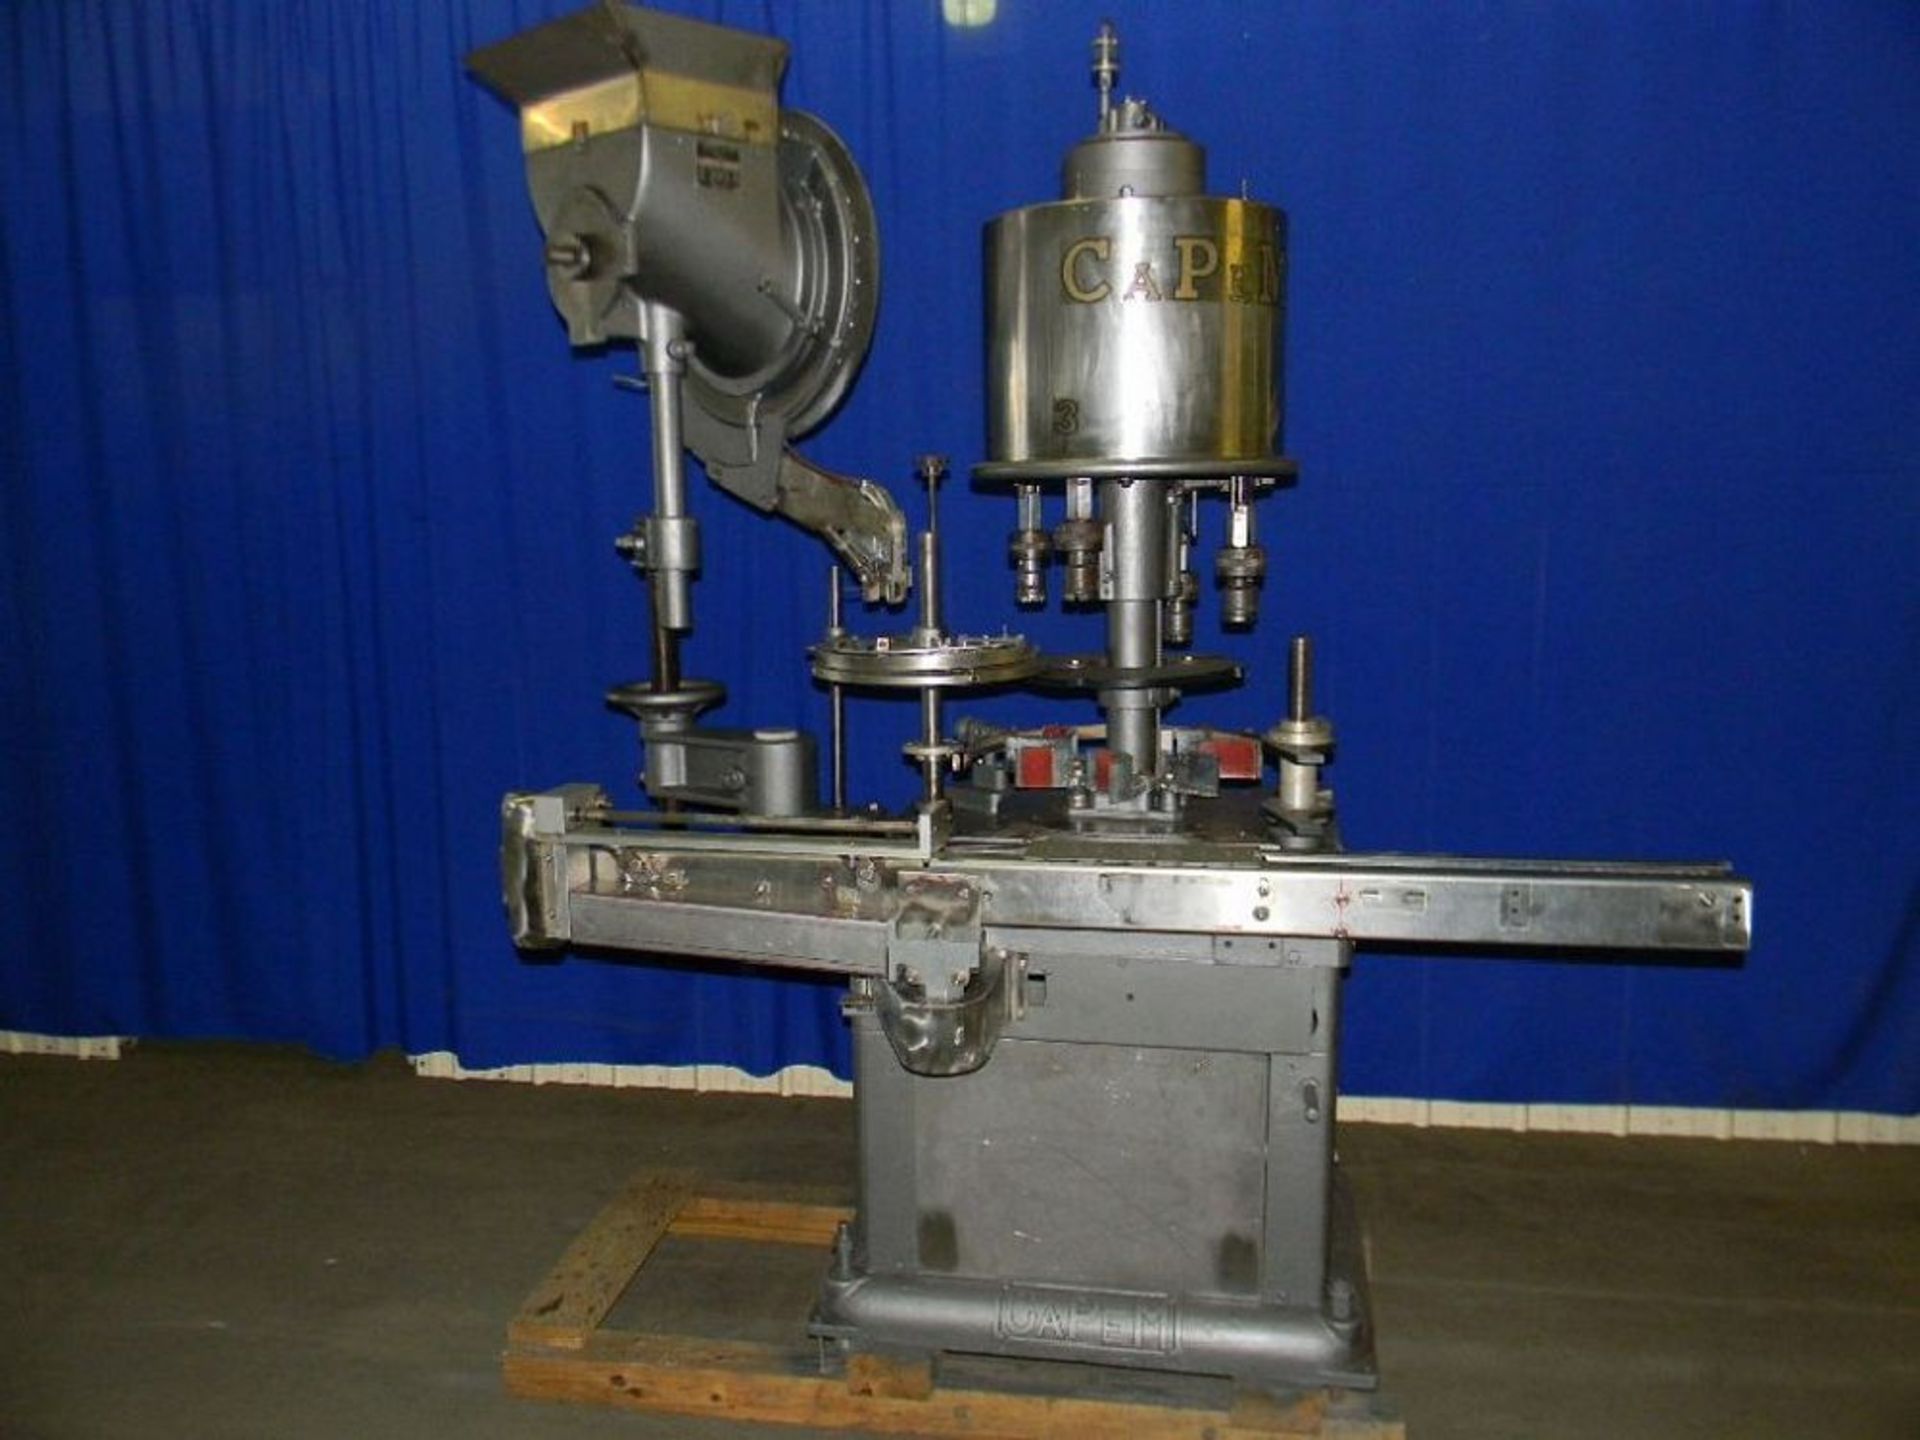 Qty (1) Consolidated D4FA 4 Head Rotary Screw Capper - Consolidated Model D4FA Rotary Screw Capper - - Image 2 of 5